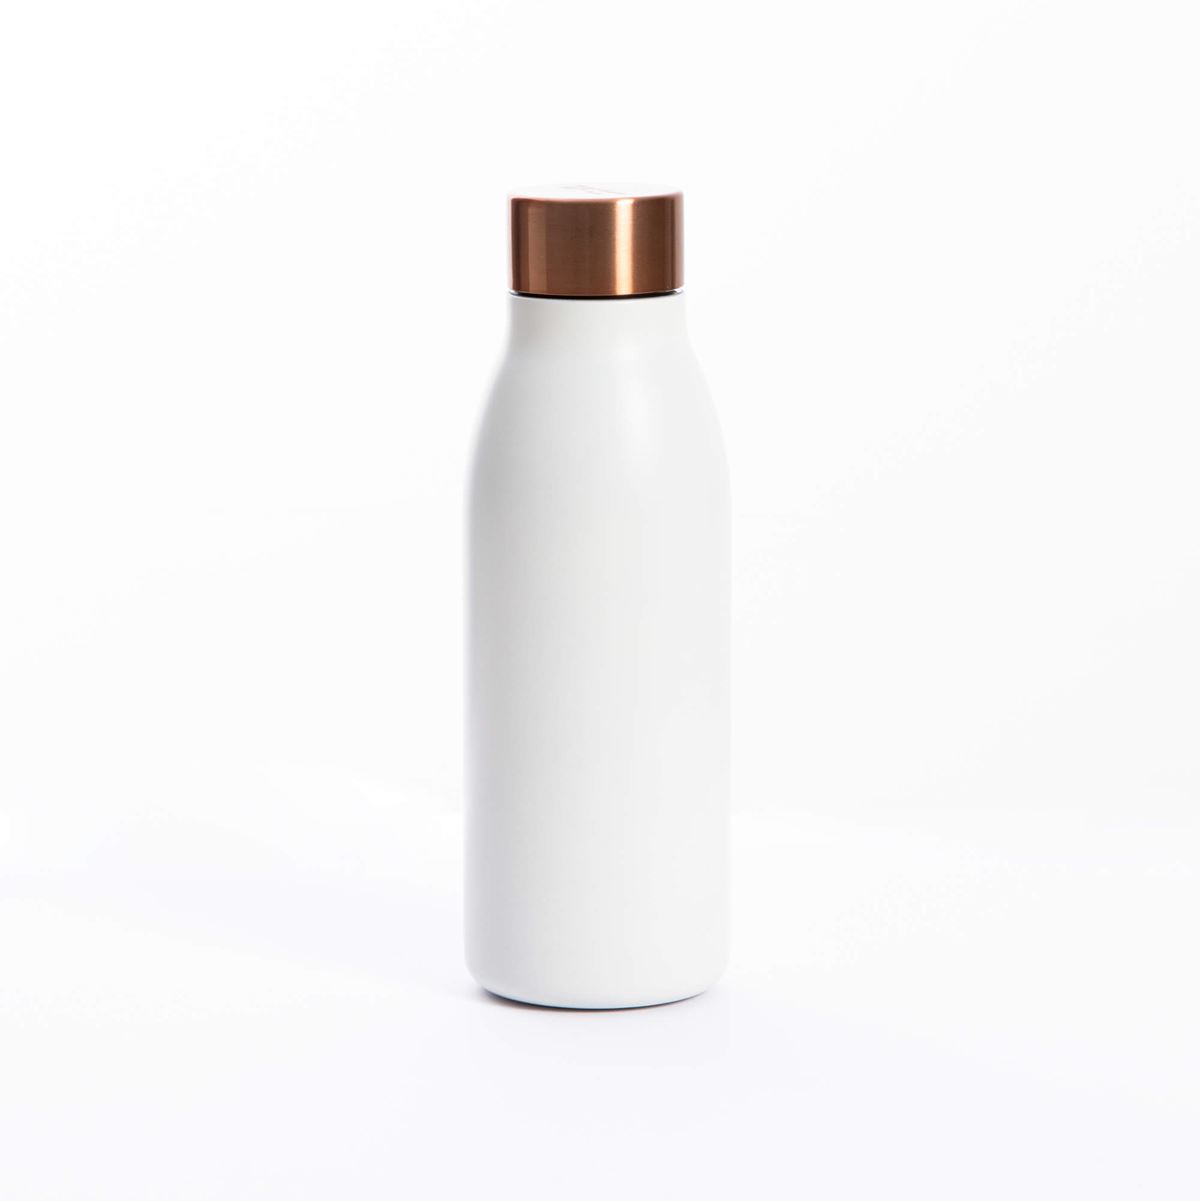 Insulated water bottle - Shine model